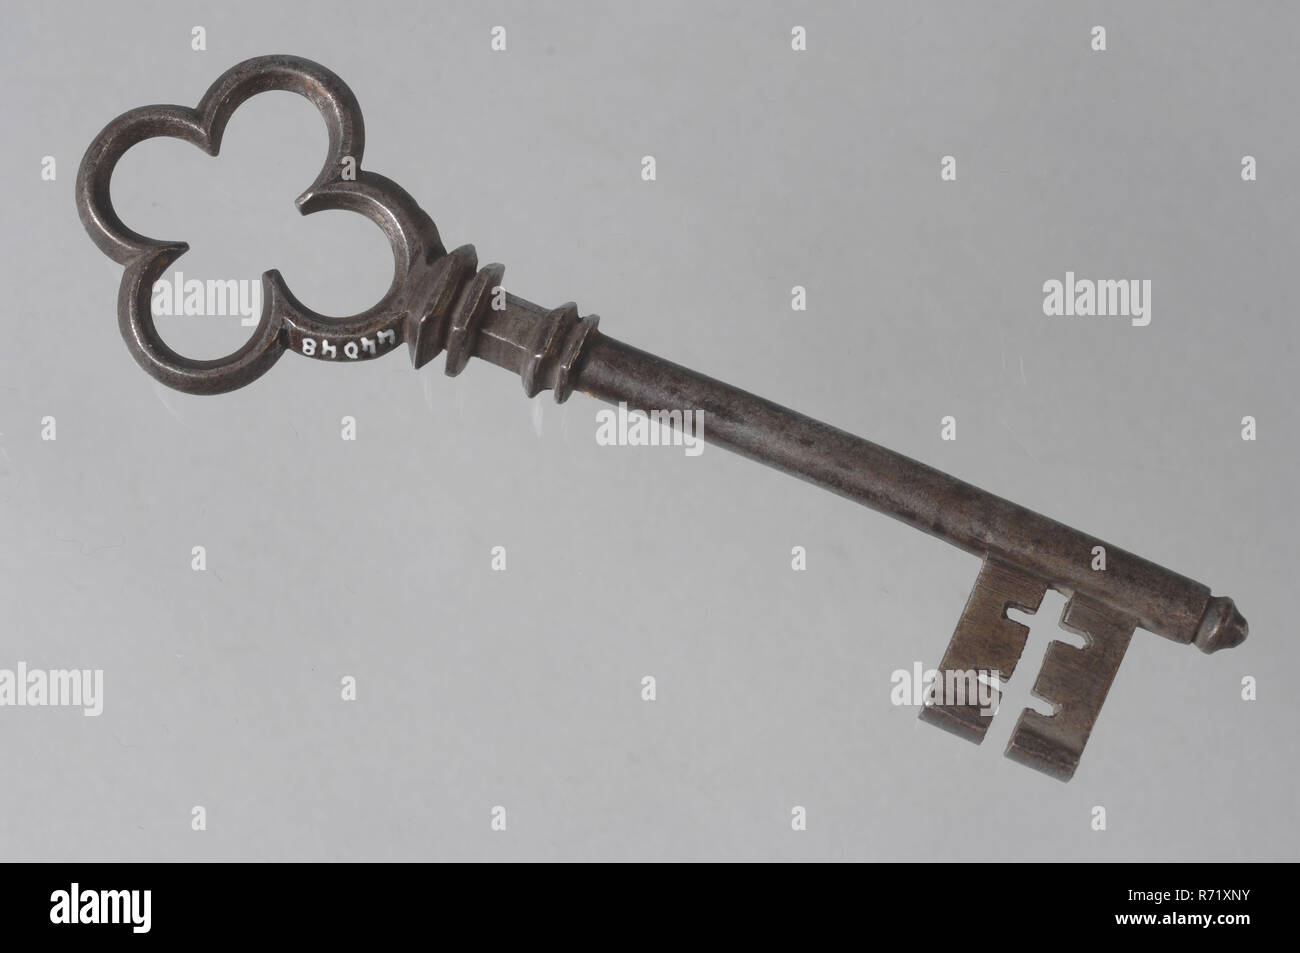 Decorated key with cloverleaf shaped eye, massive key handle and cruciform beards in beard, key iron iron, hand forged Key with cloverleaf shaped eye (handle) solid key handle (with socket wrench end?) Hexagonal collar with different profile edges cross-shaped notches (horizontal and vertical) in key beard and asymmetrical keyhole cross-section hang-and-close work Rotterdam education Academy of Fine Arts and Technical Sciences Cool Coolvest Dijkzigt GJ de Jonghweg City Triangle Blaak Academy of Fine Arts and Technical Sciences Rotterdam. Stock Photo